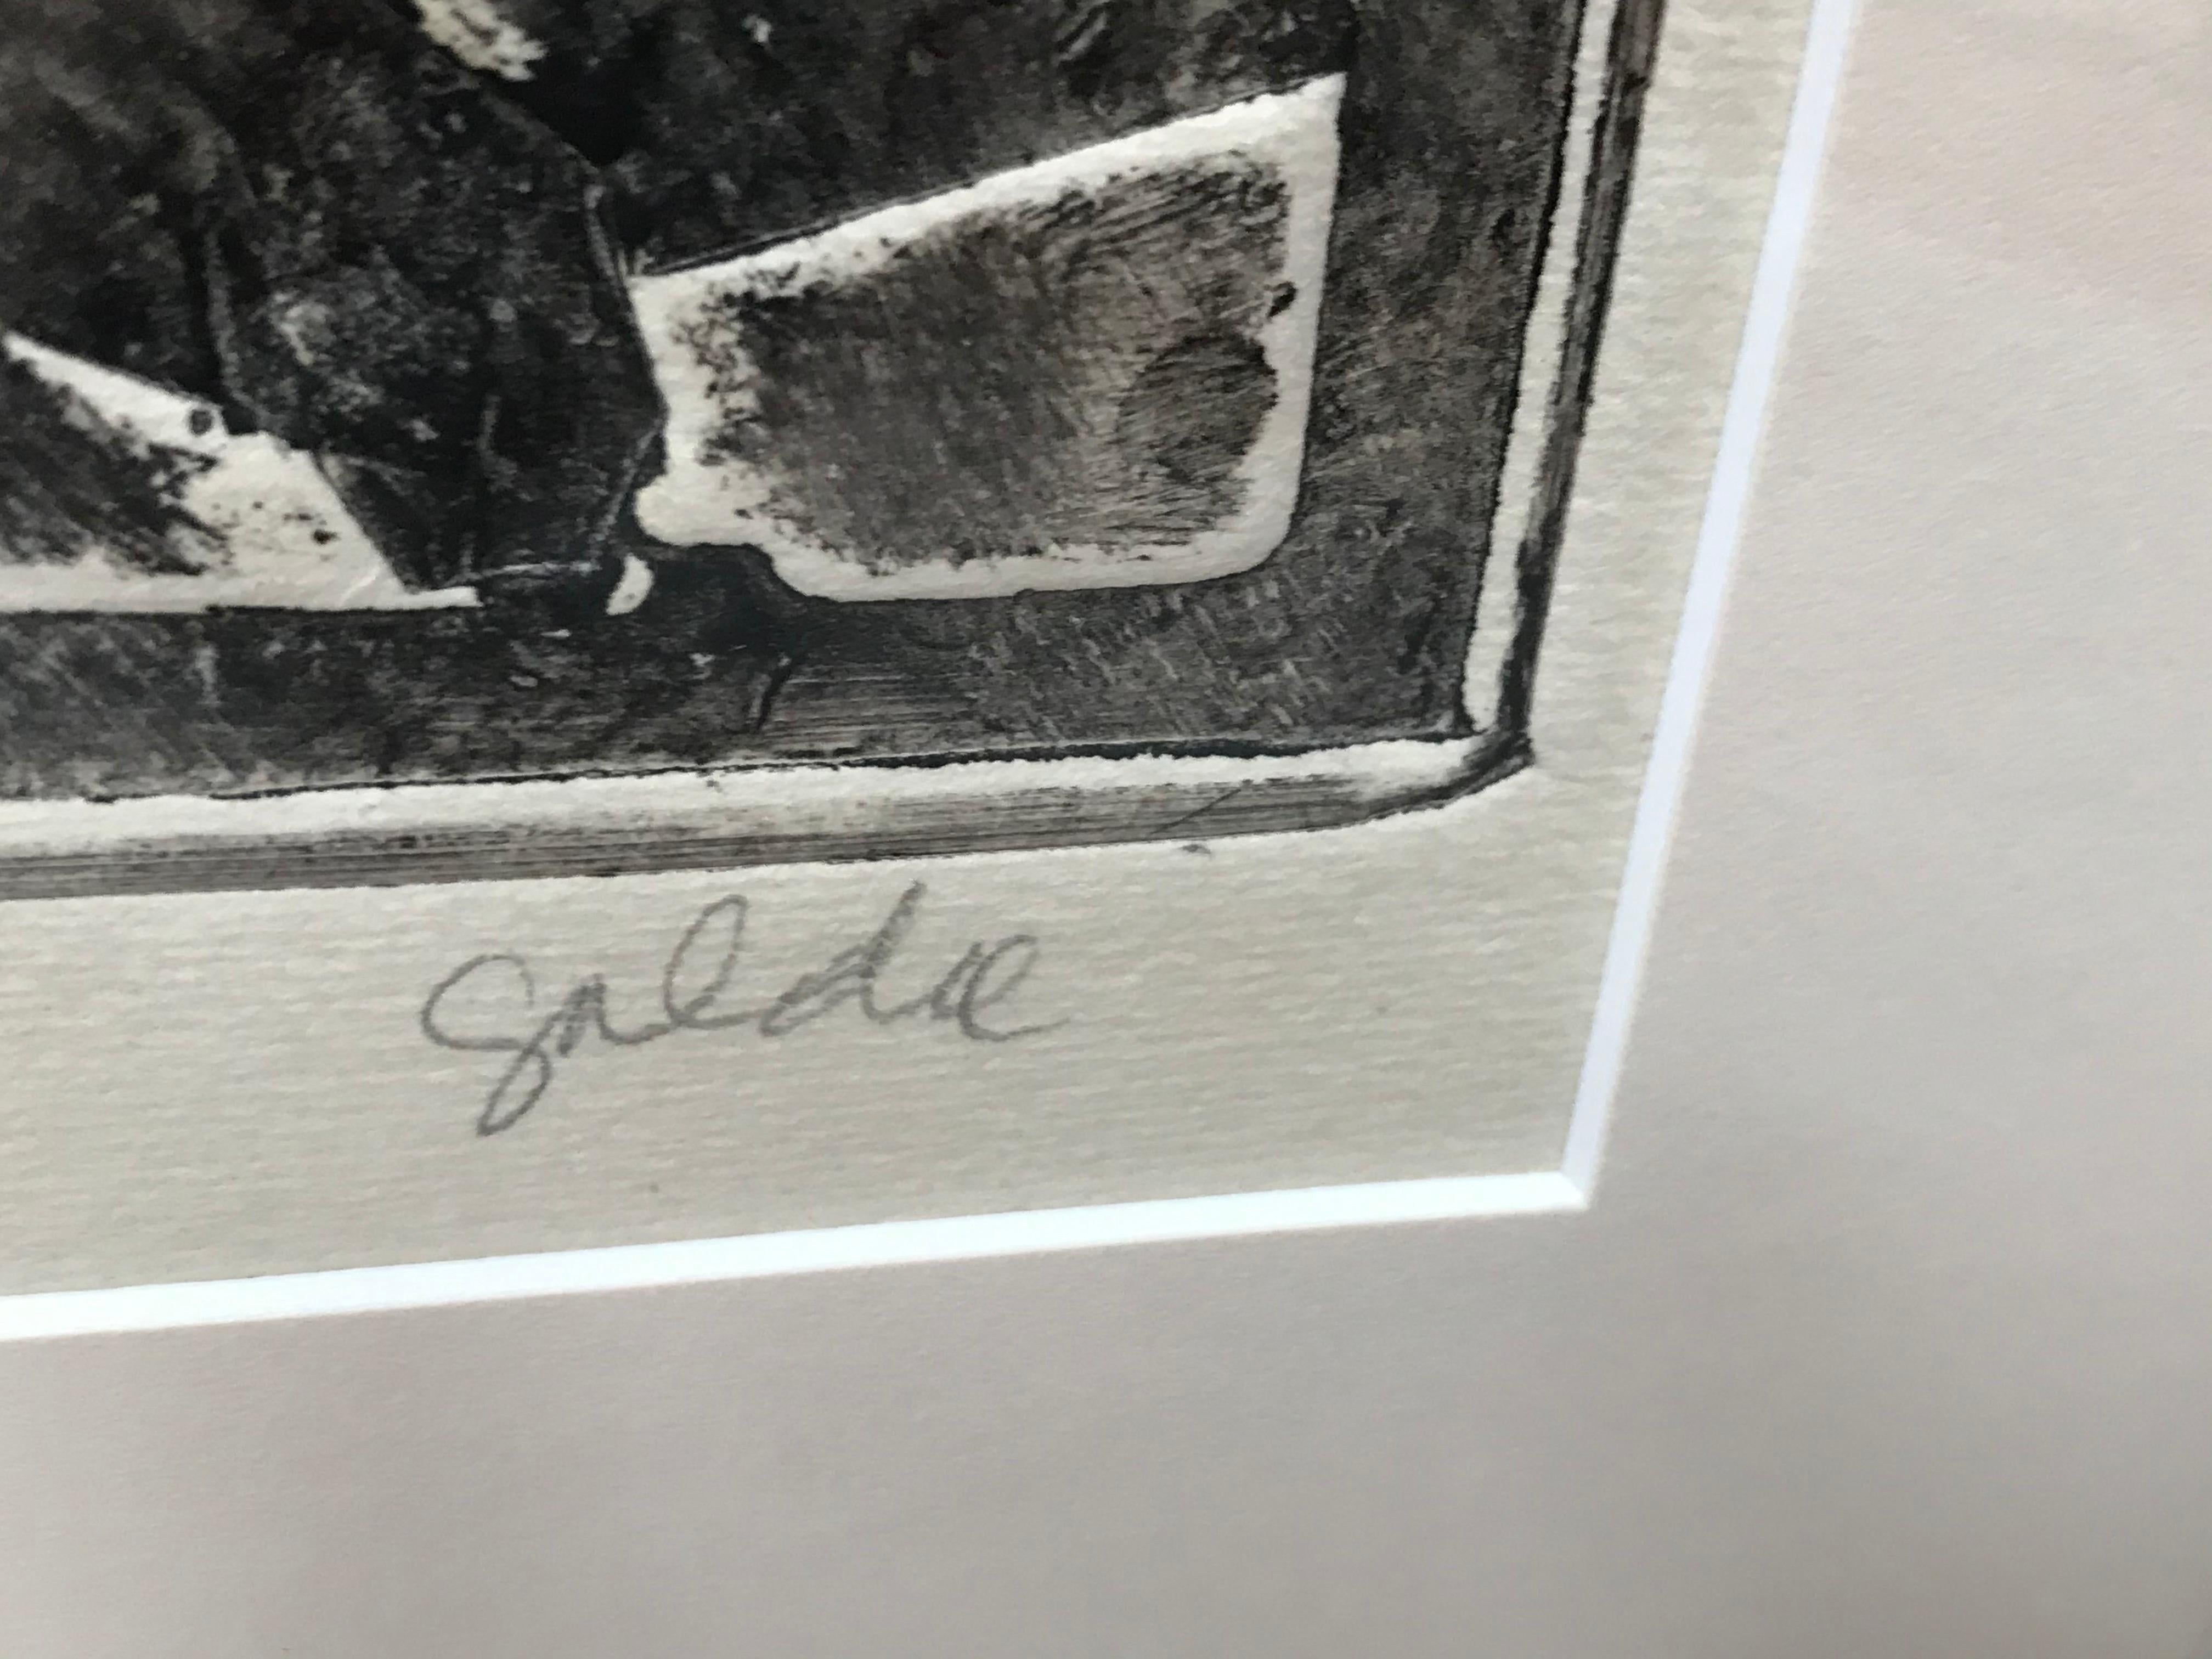 Embossed etching signed Goldie (1921-2007) and numbered 1/1.
Goldie was an Australian painter.